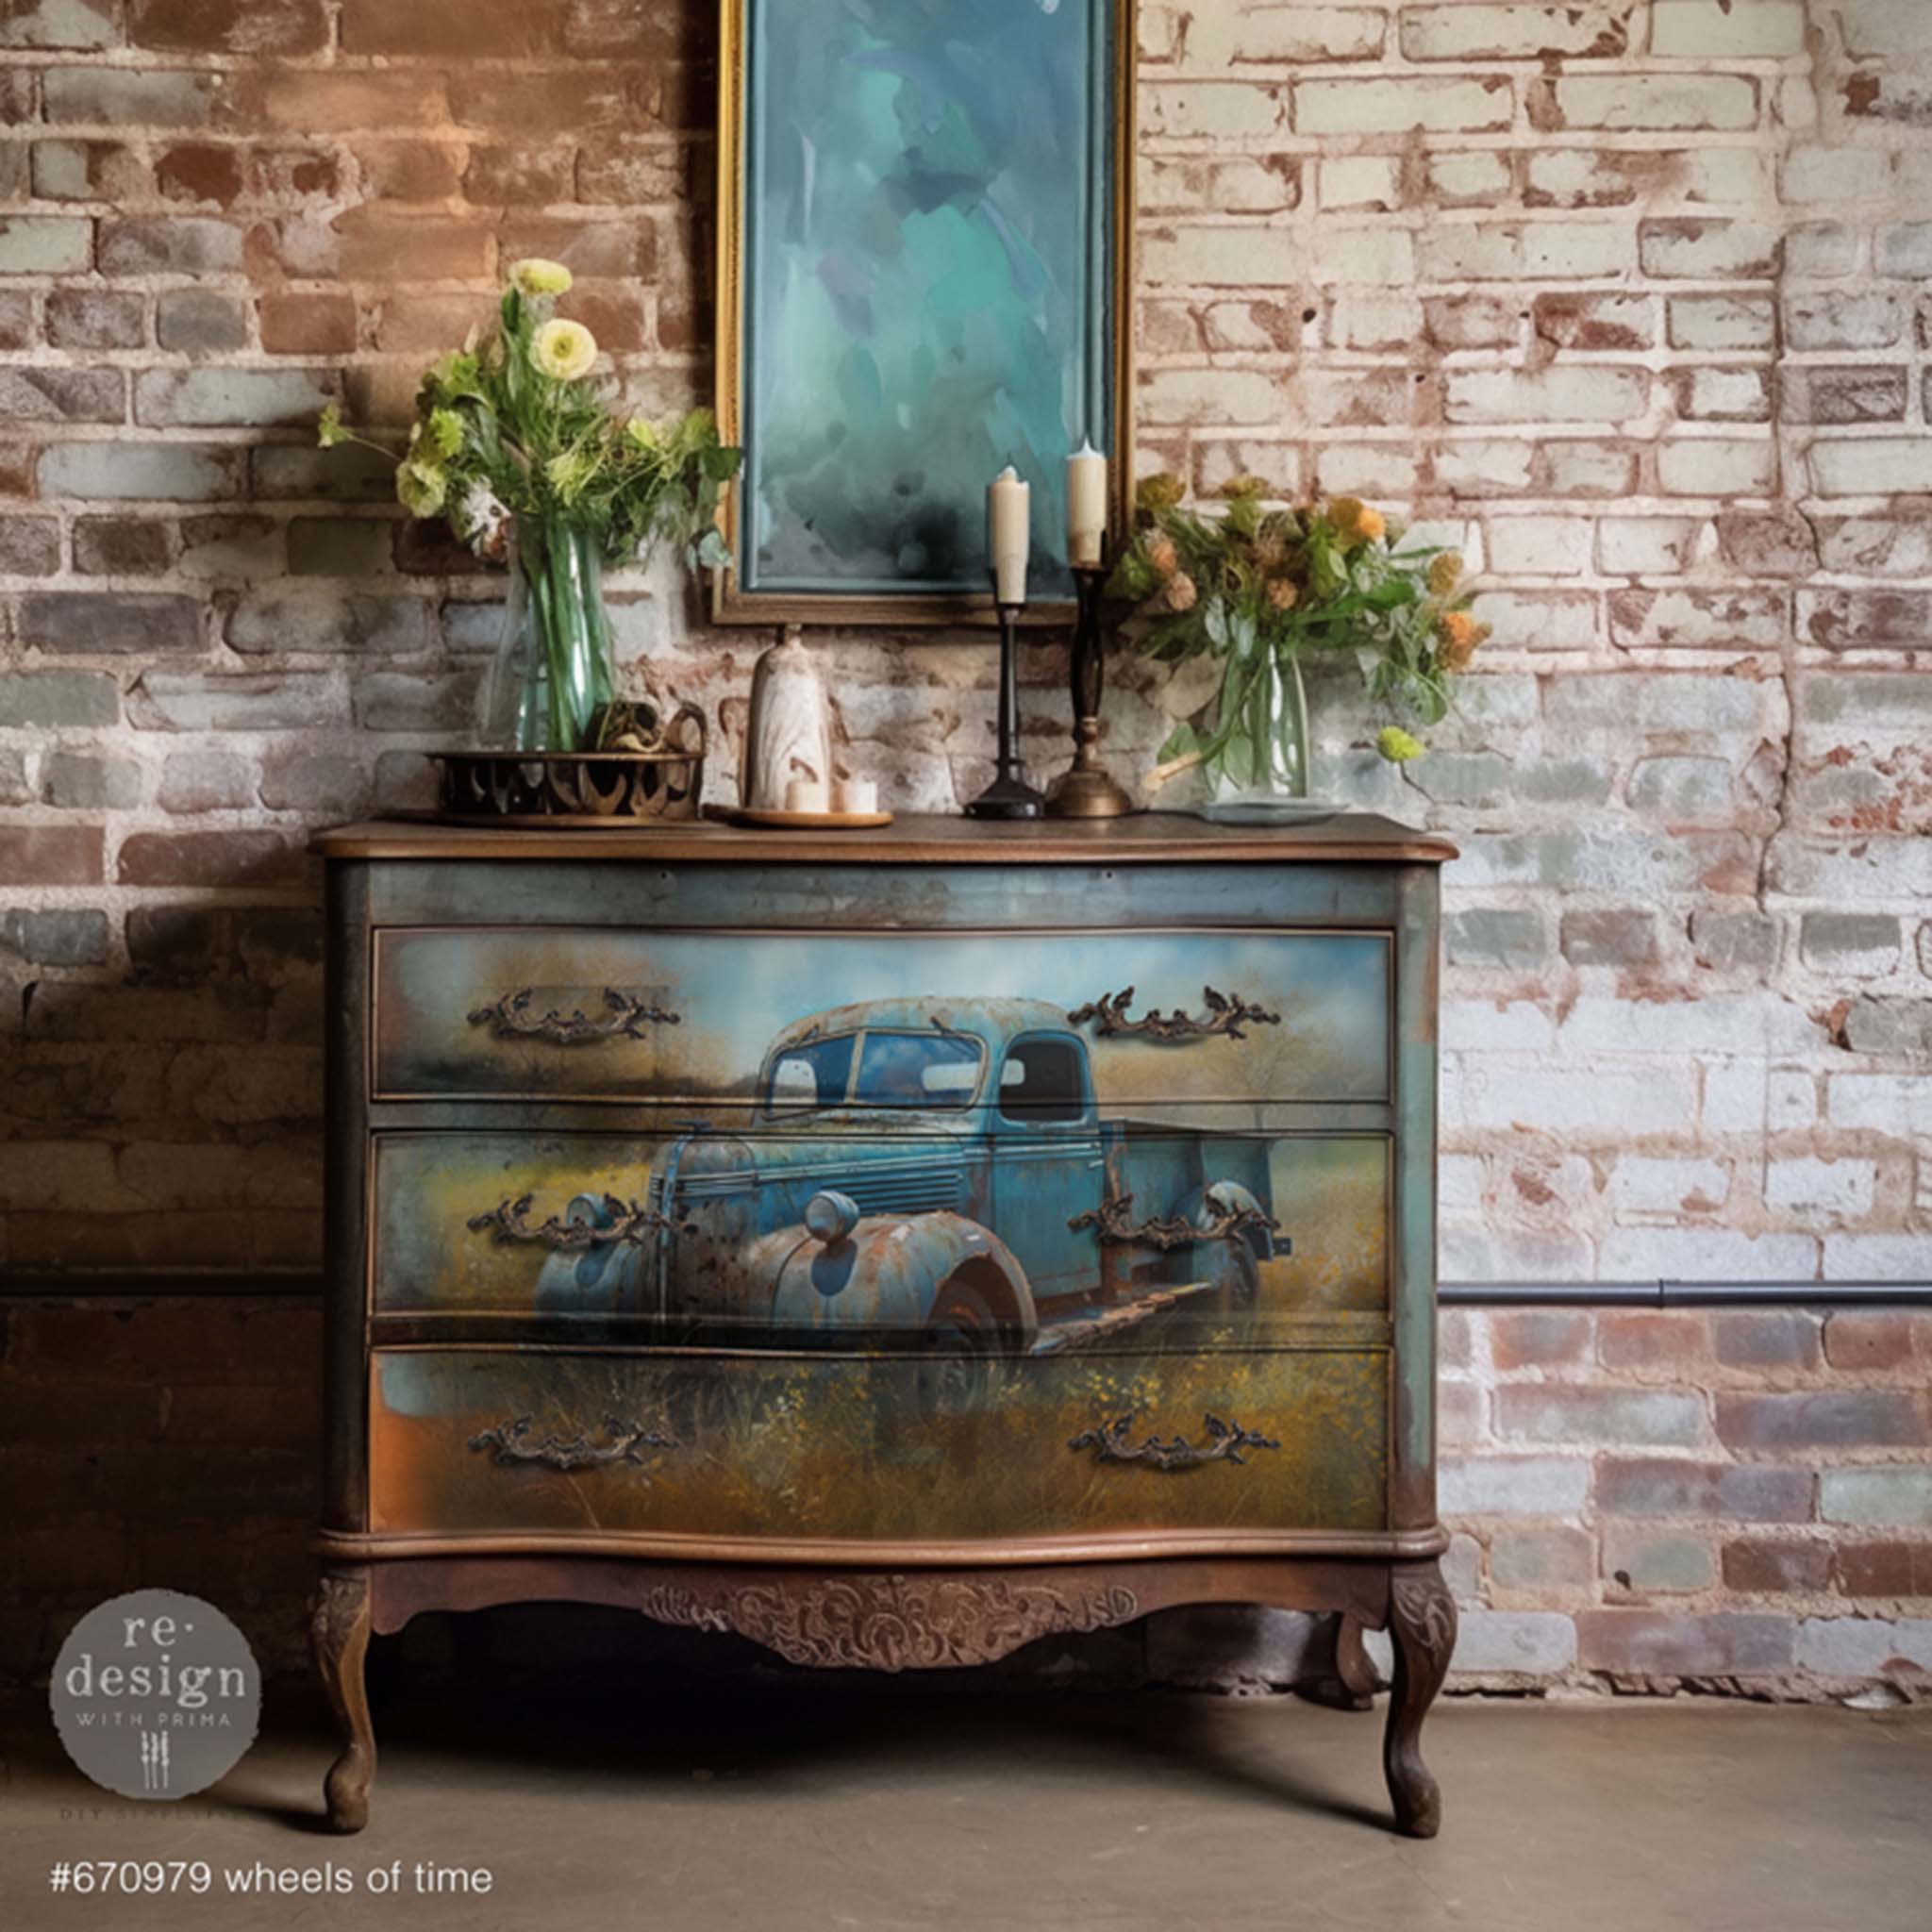 A vintage 3-drawer dresser is painted in patina rust colors and features 1 sheet of ReDesign with Prima's Wheels of Time tissue paper on the drawers.